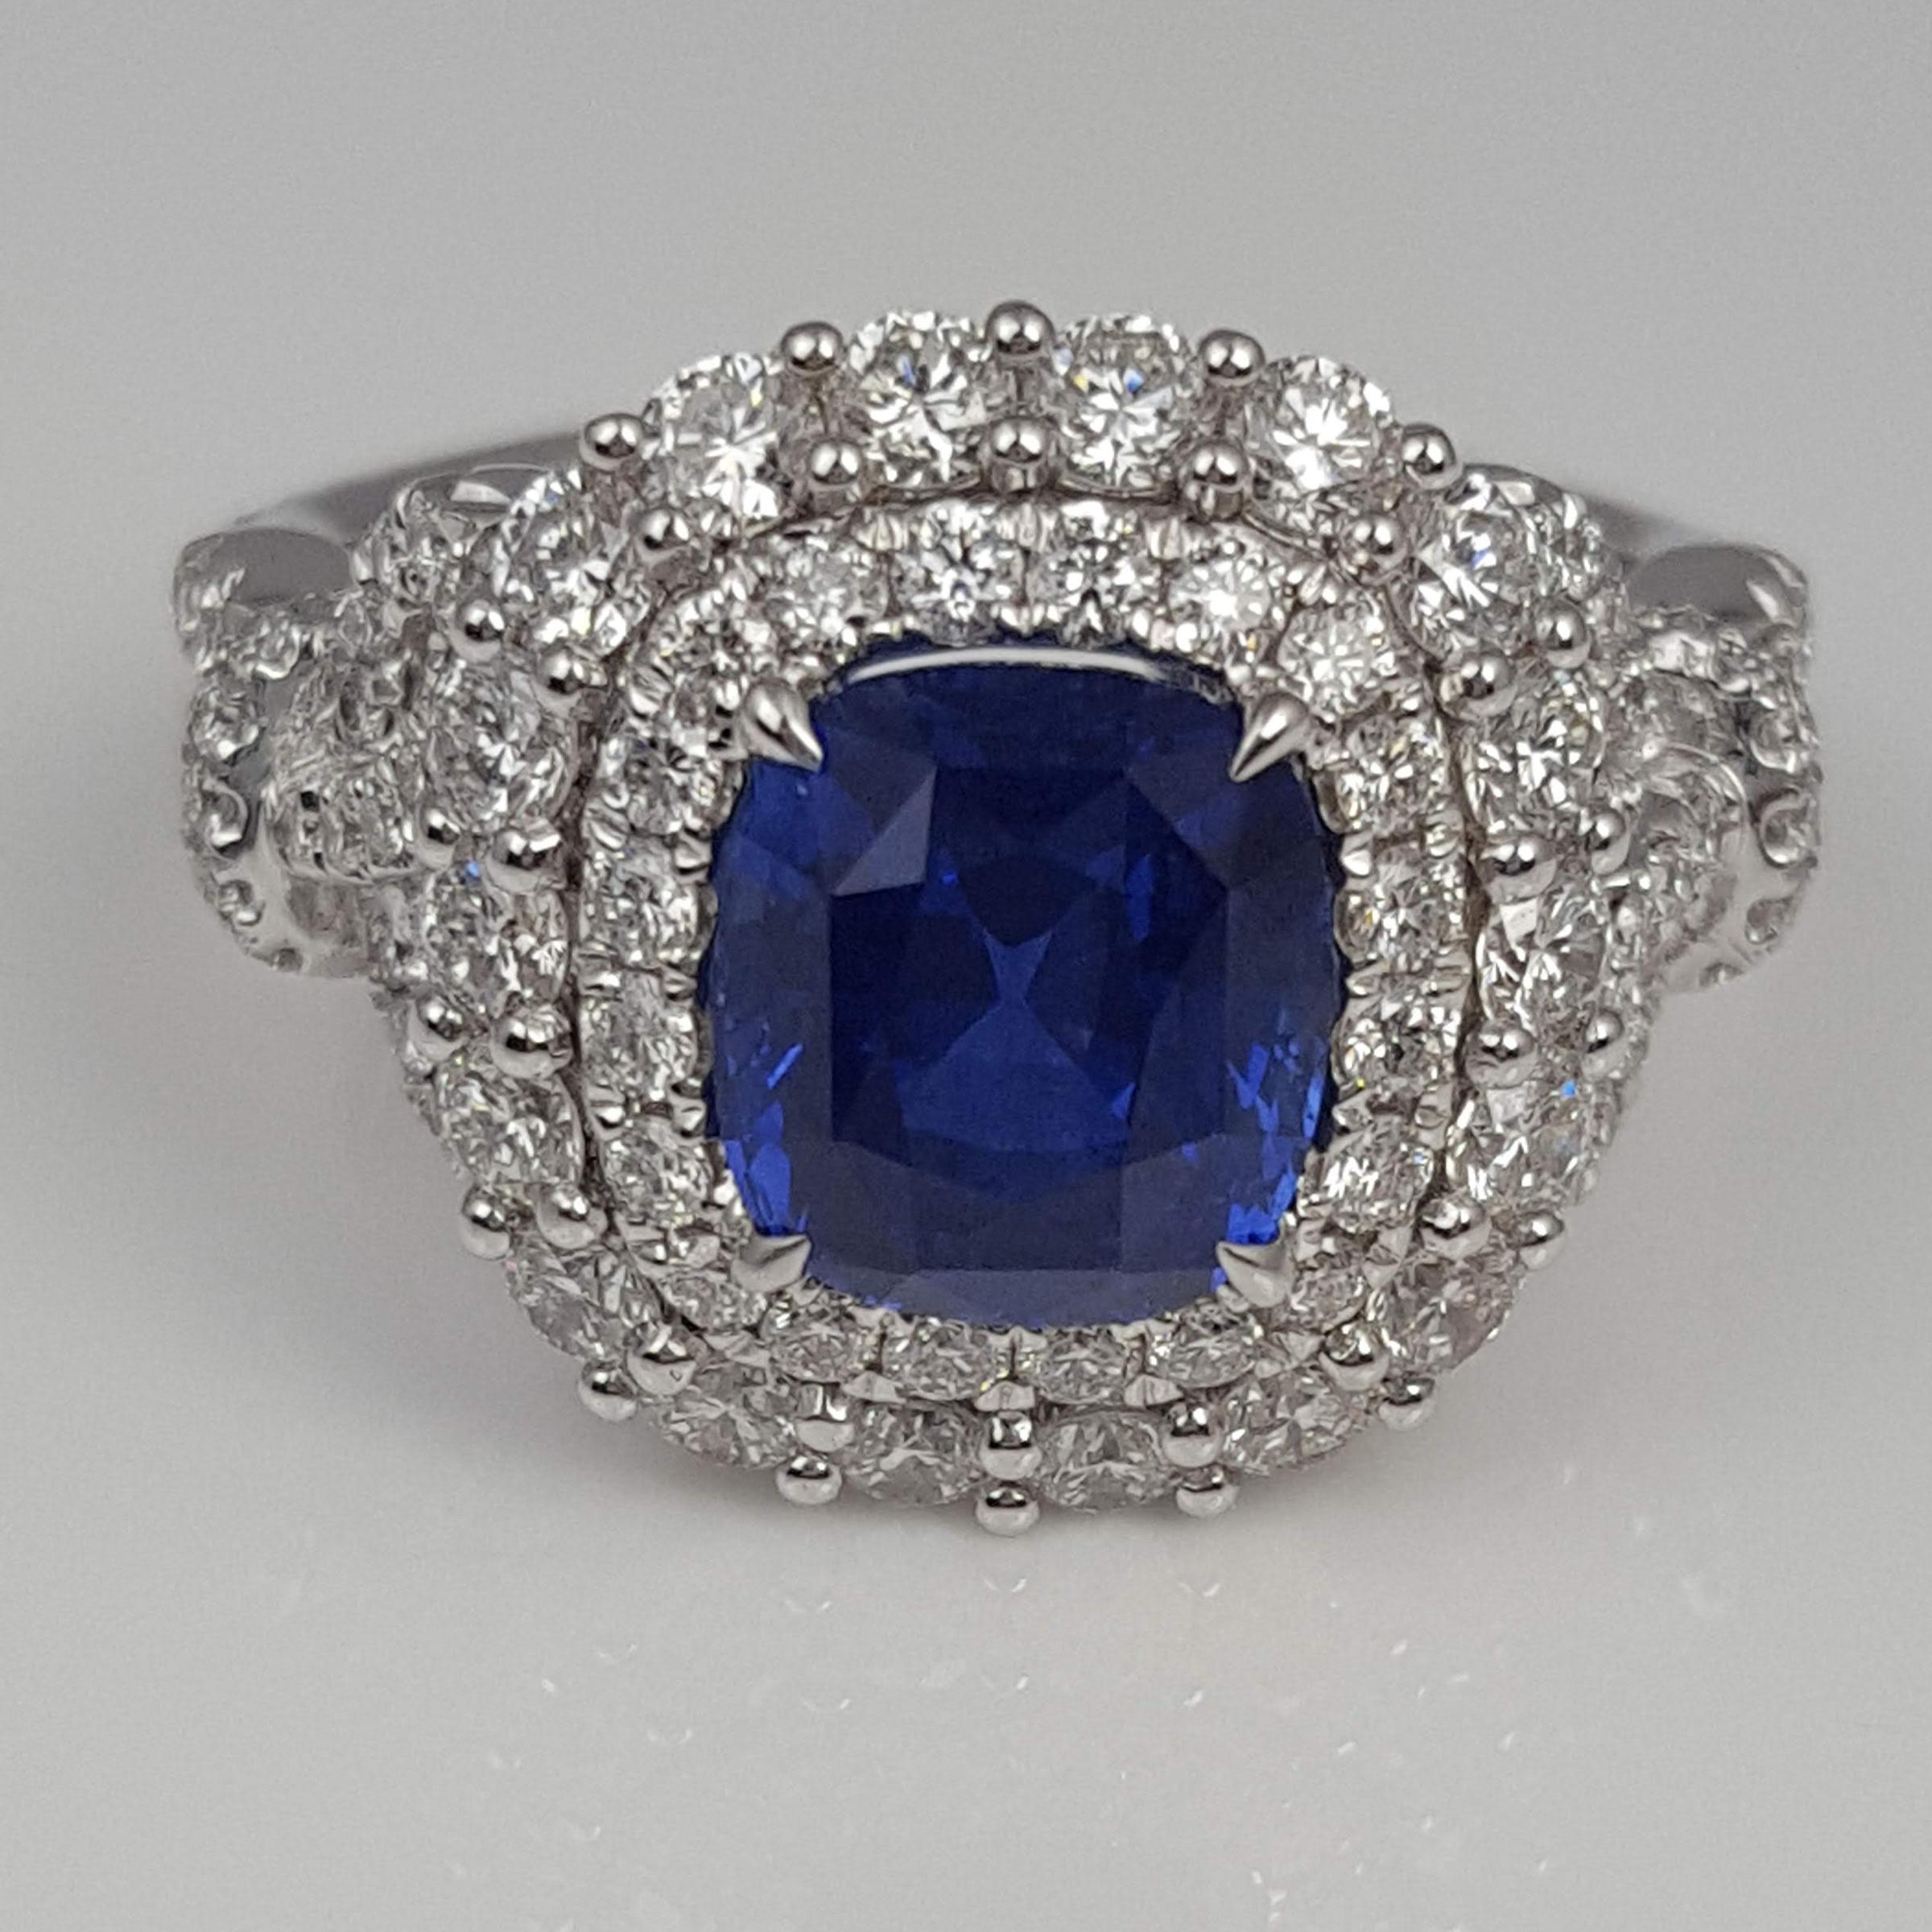 Featuring a GIA Certified 2.55 carat cushion-cut Ceylon Sapphire at its center, elegantly encircled by a double halo of round white diamonds with a total diamond weight of 1.61 carats, this ring radiates brilliance from every perspective.

GIA